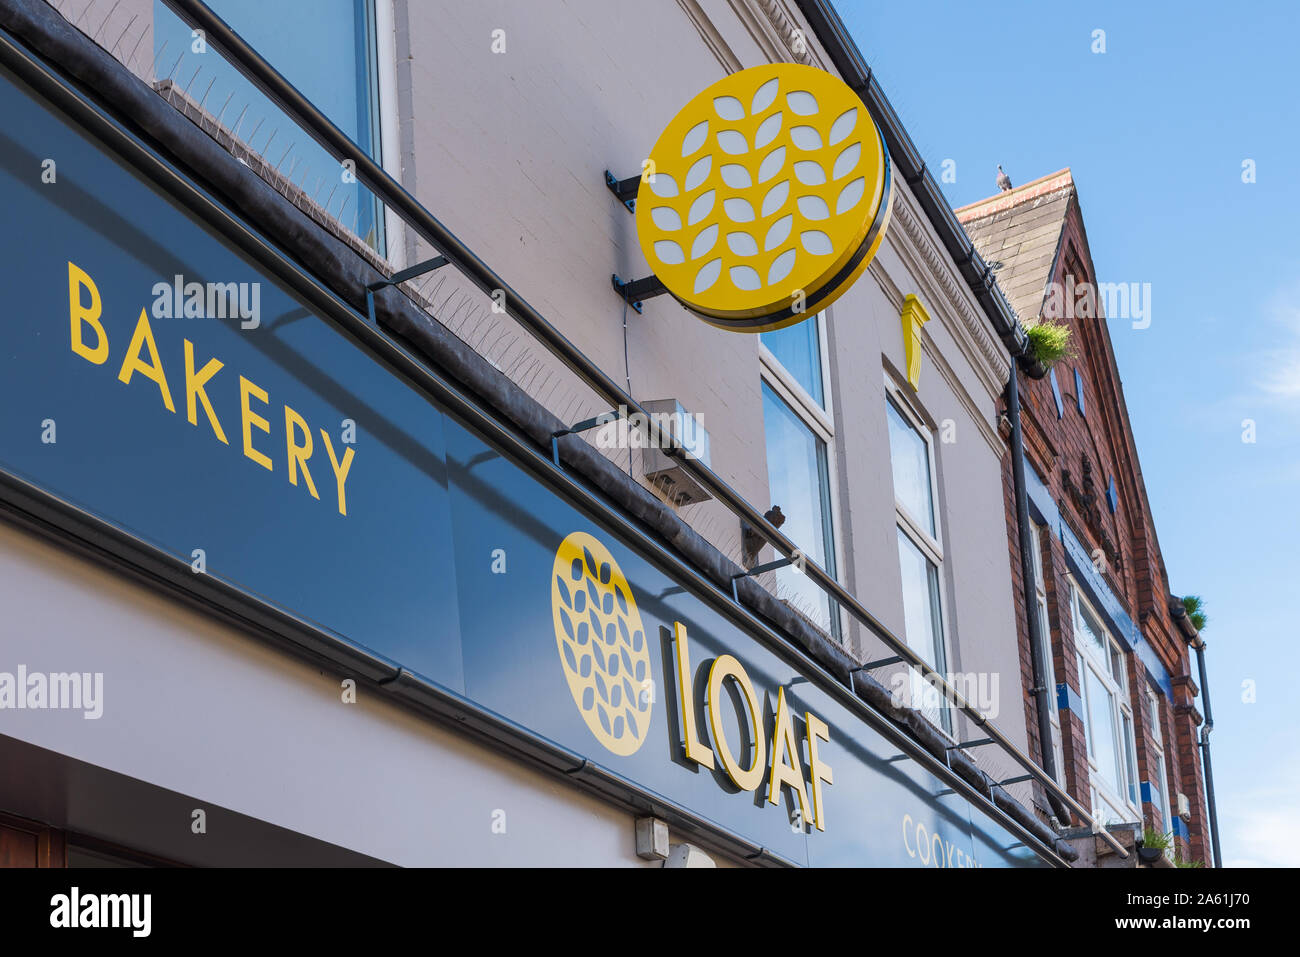 Loaf artisan bakery and cookery school in  Road, Stirchley, Birmingham, UK Stock Photo